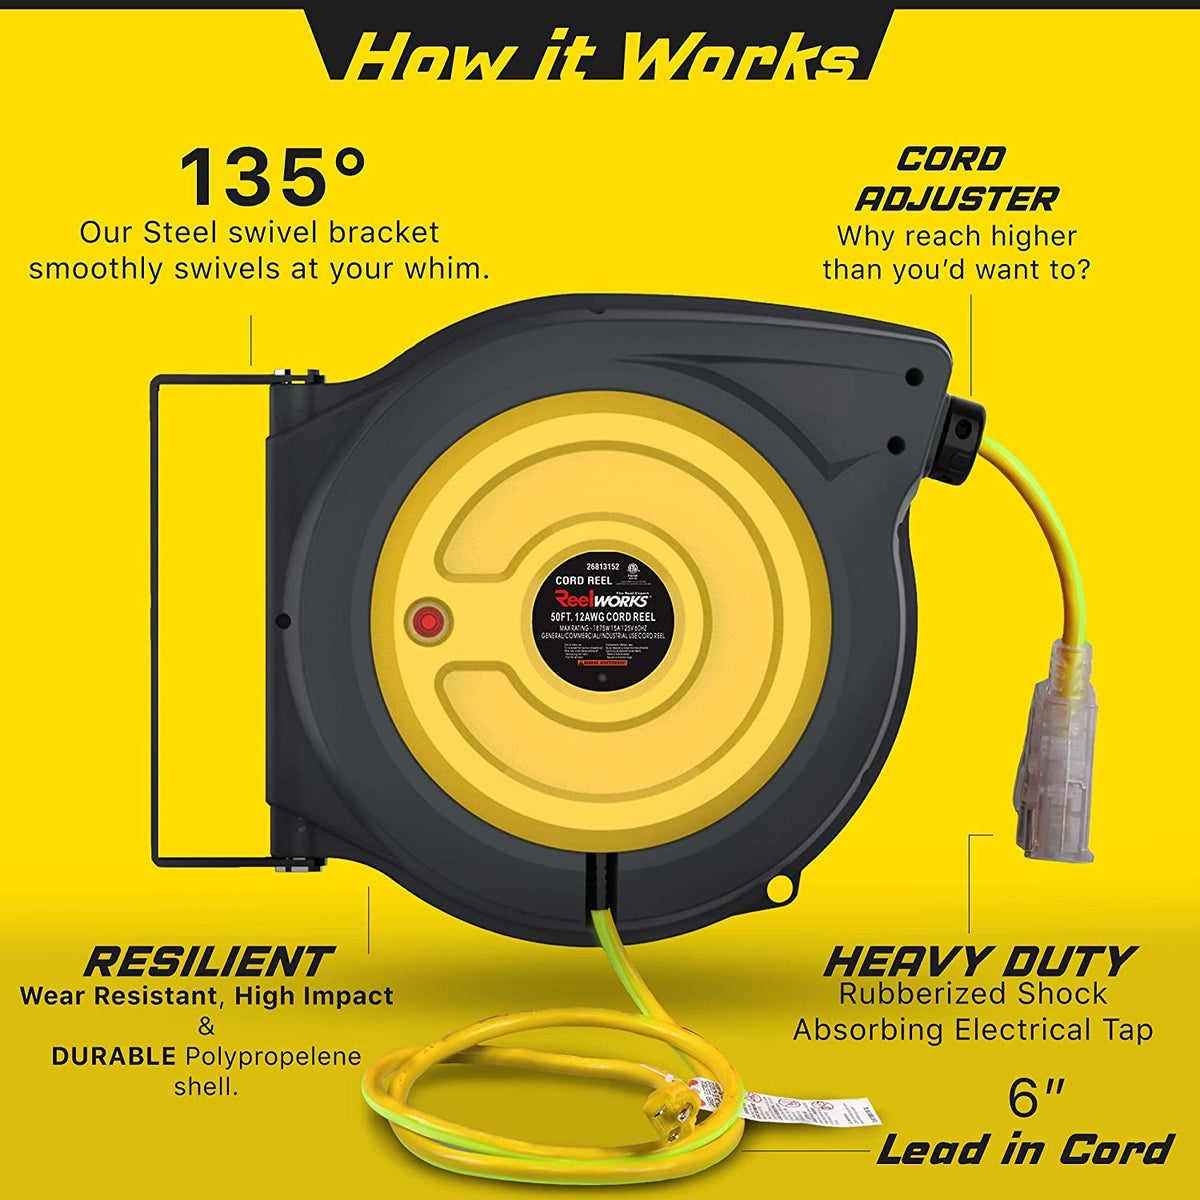 ReelWorks GUR025 12 AWG x 50' Retractable Extension Cord Reel New